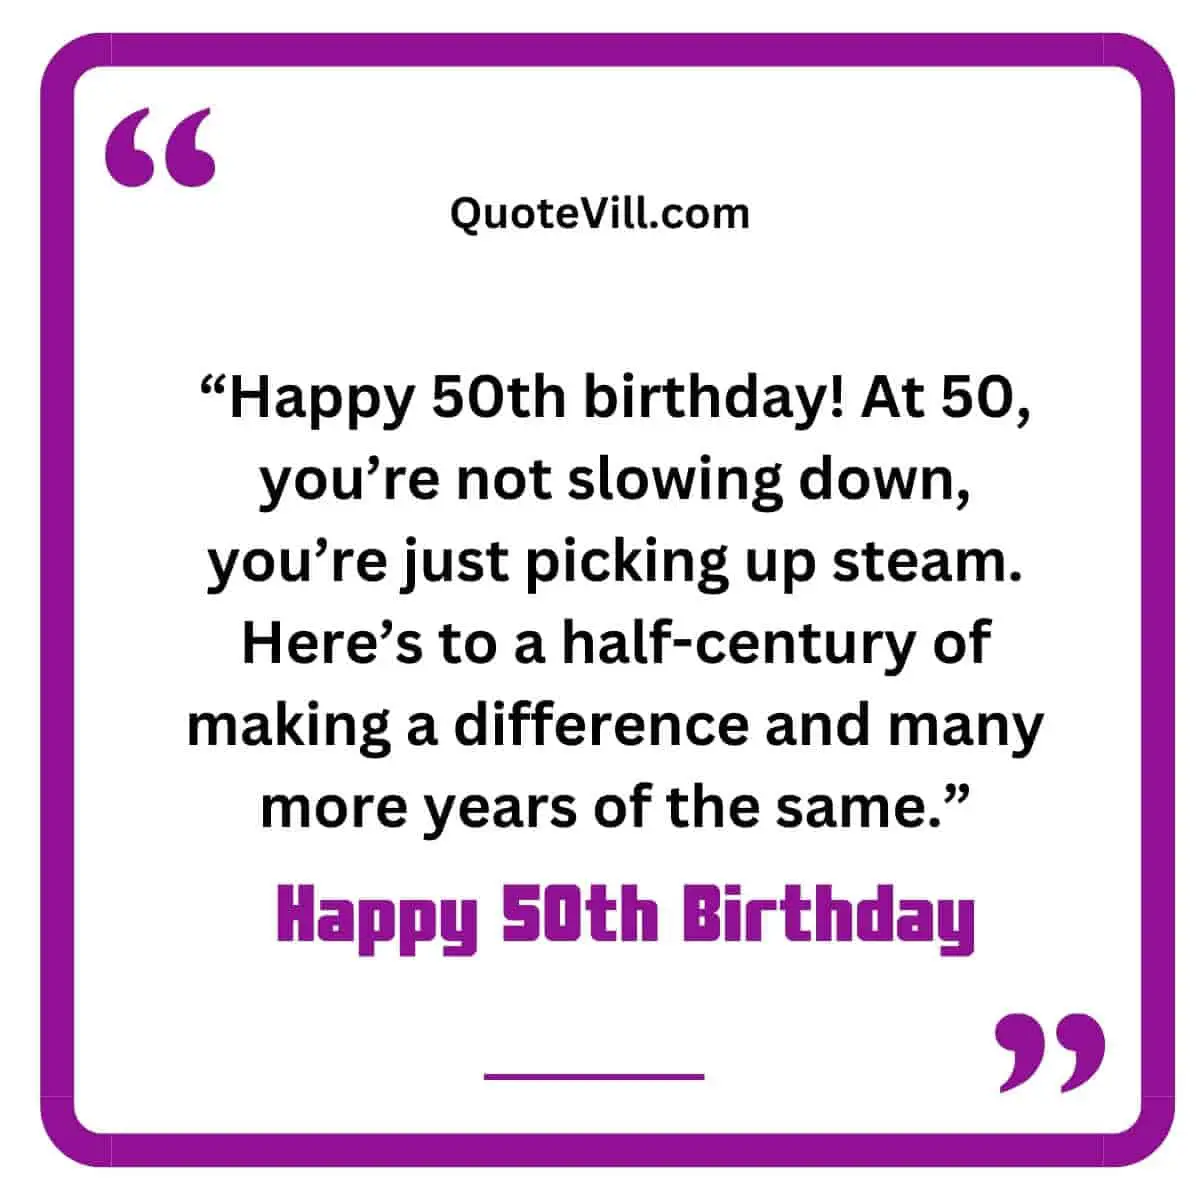 Happy 50th birthday! At 50, you're not slowing down, you're just picking up steam. Here's to a half-century of making a difference and many more years of the same.